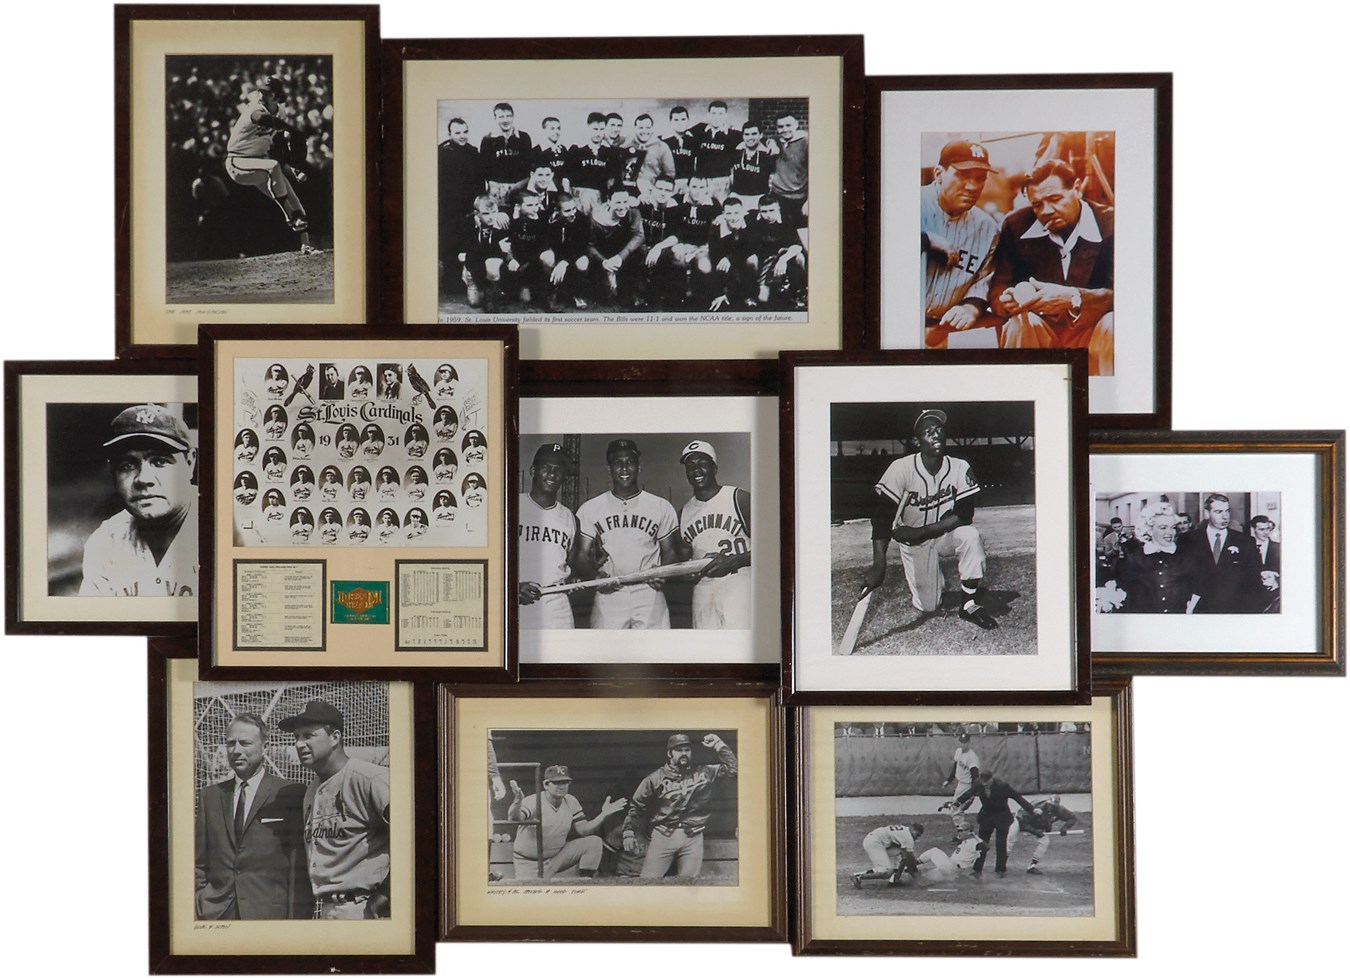 Framed Items that Hung in Mike Shannon's Restaurant (34)